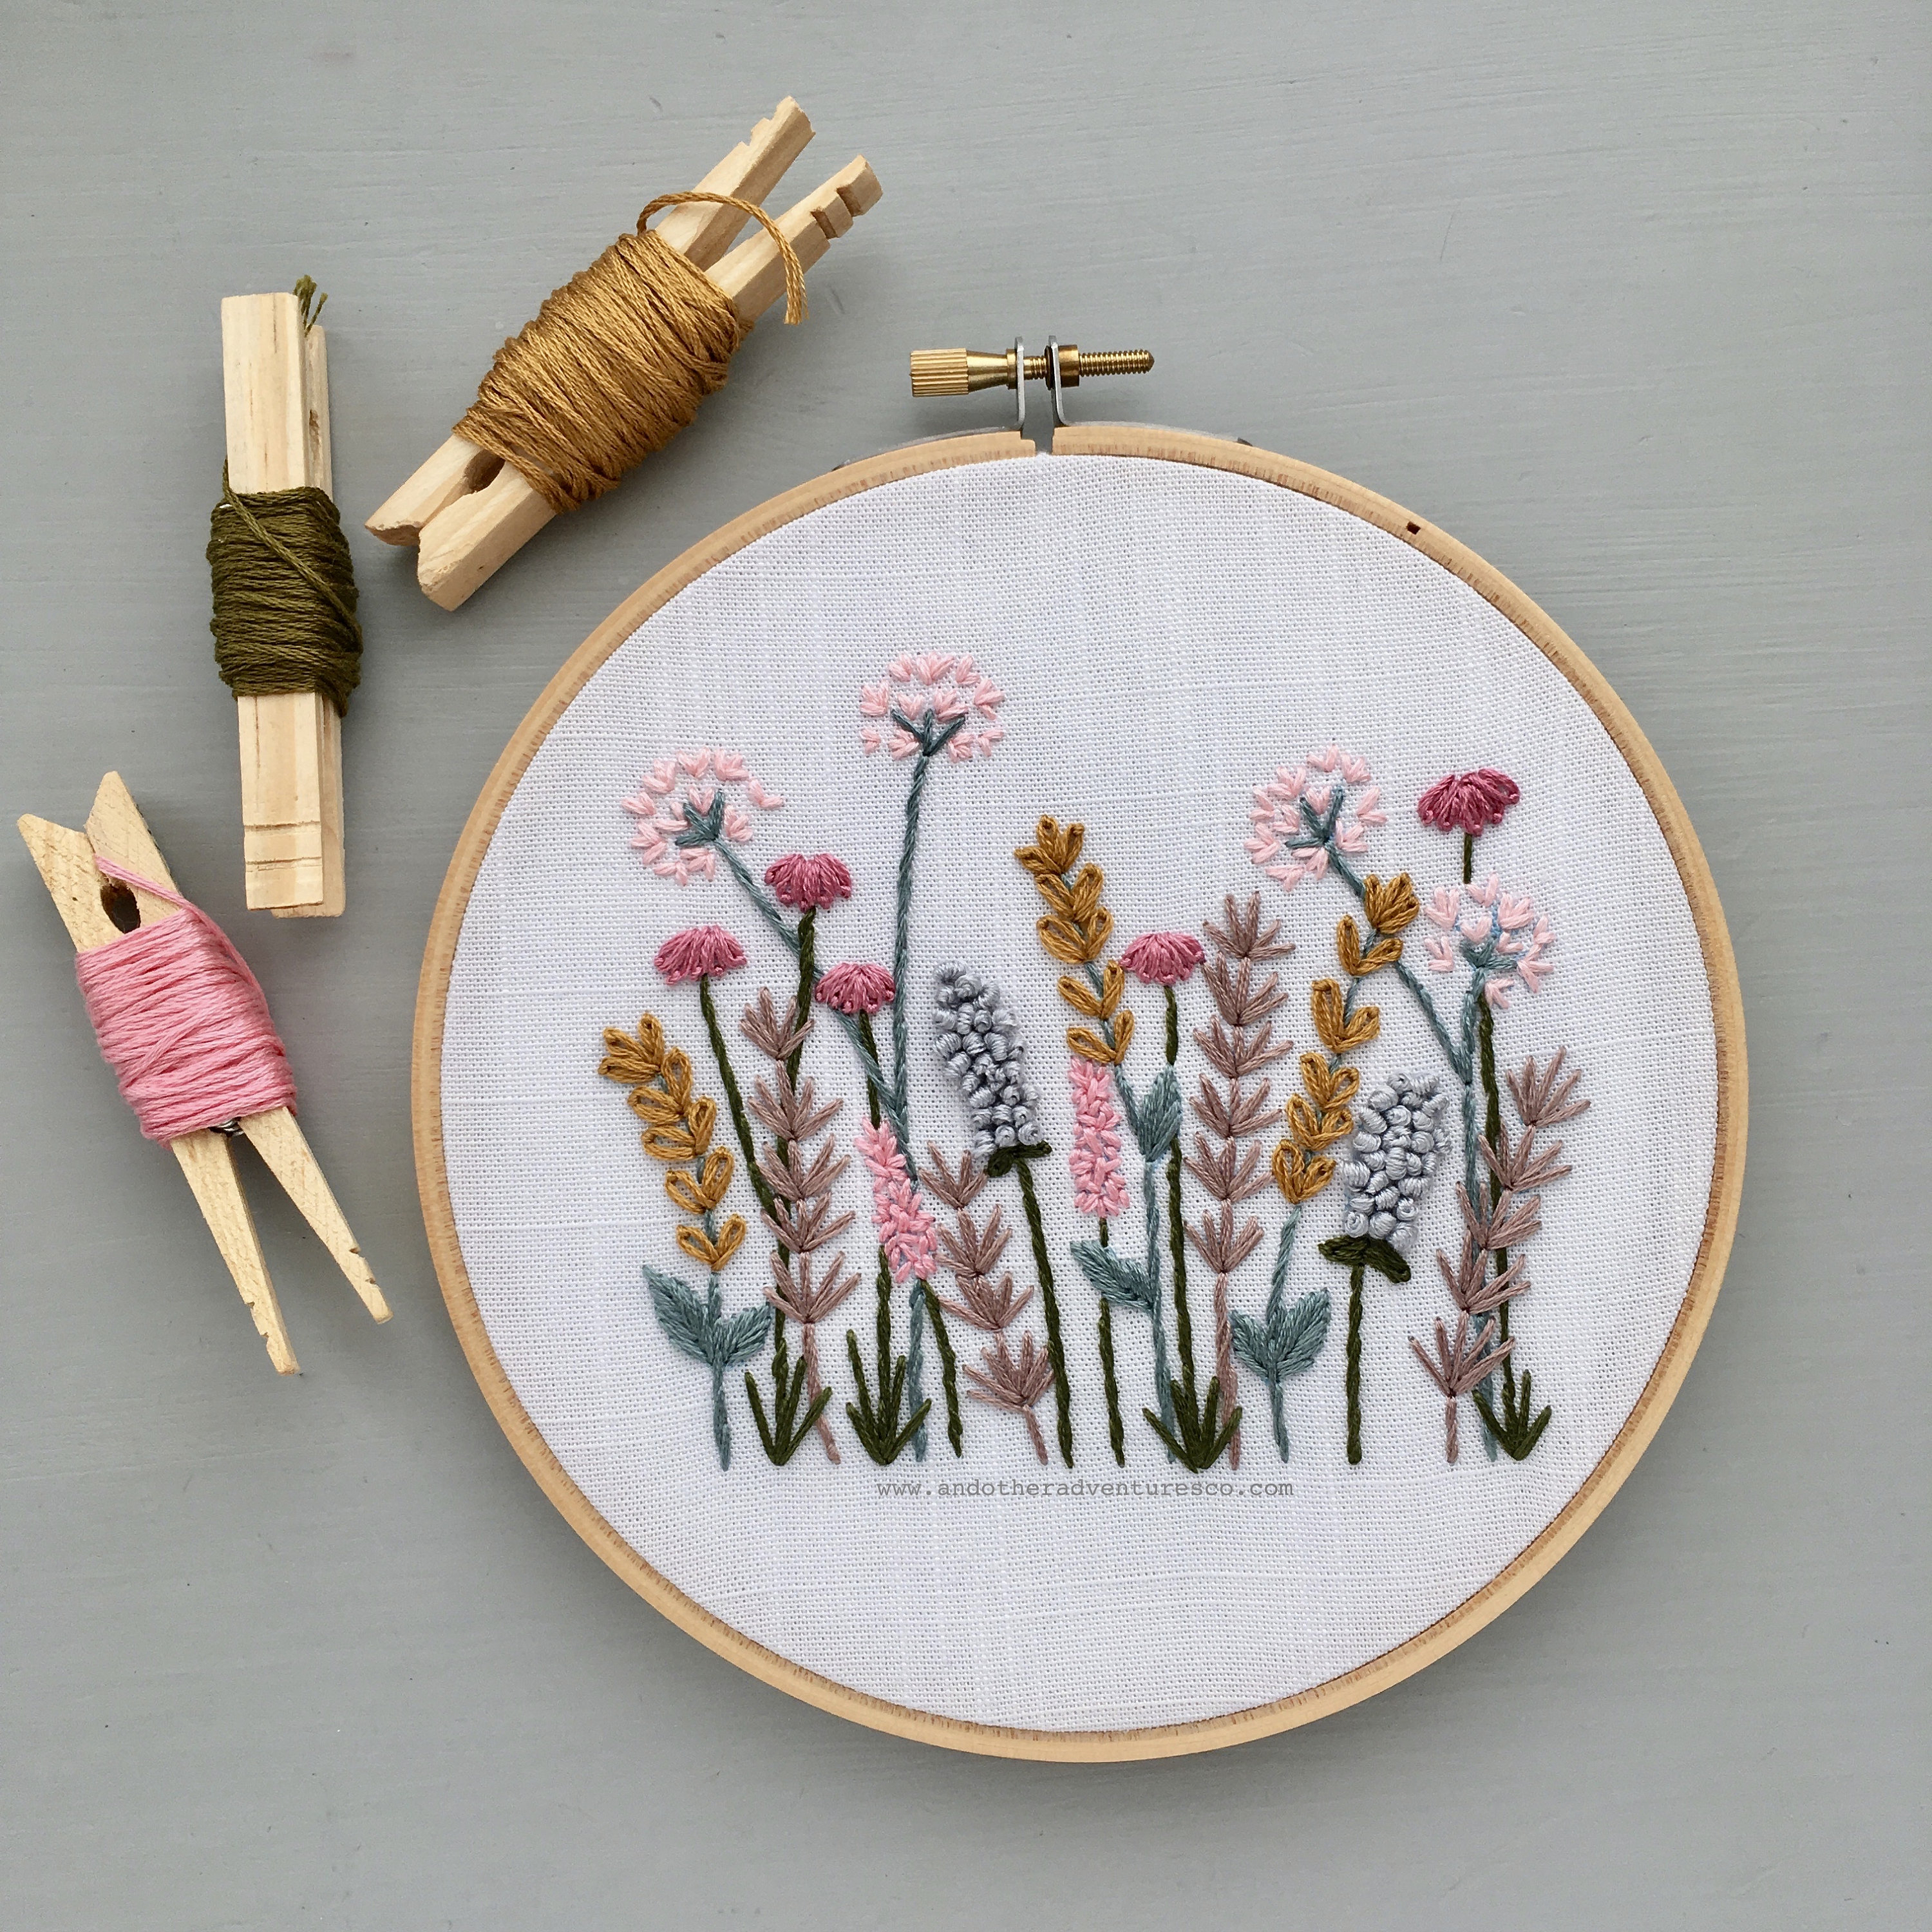 Persian Embroidery Patterns Floral Meadow Hand Embroidery Pattern Pdf Download Hand Embroidered Flowers Printable Stitching Guide Spring Meadow Diy Hoop Art